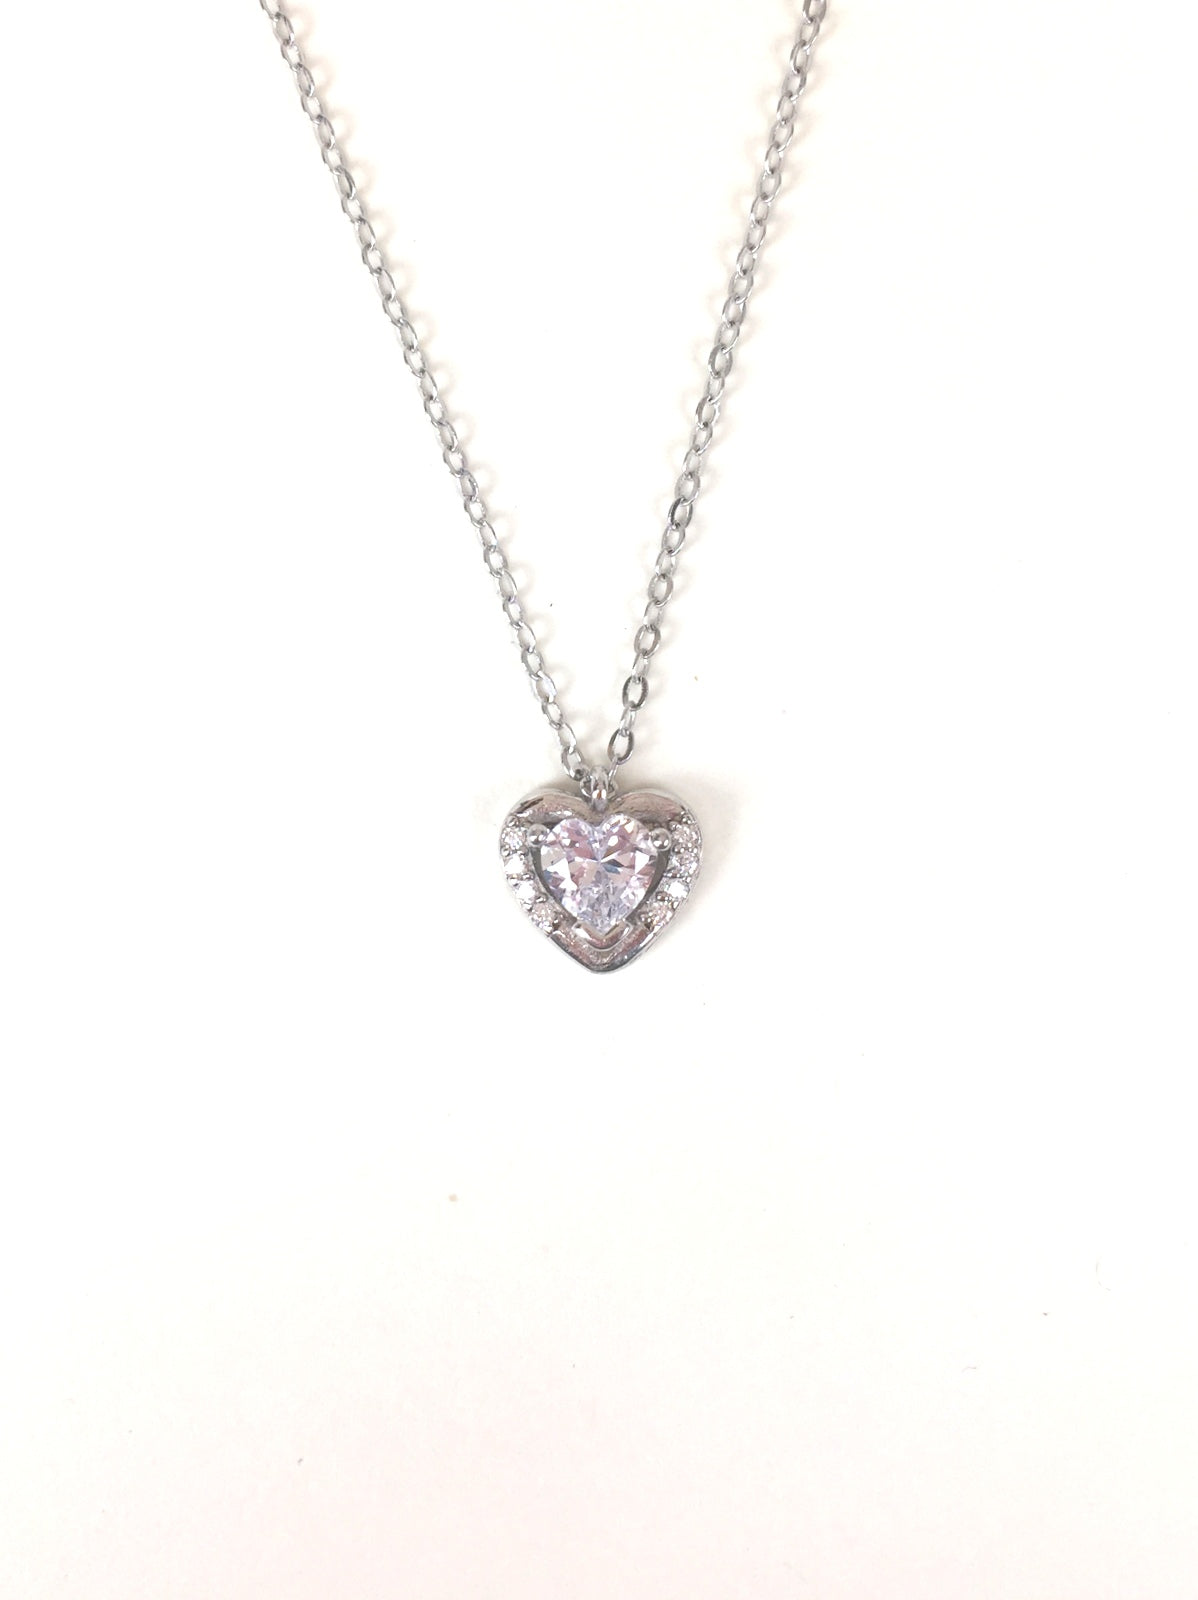 SMALL HEART PAVE CZ STERLING SILVER NECKLACE